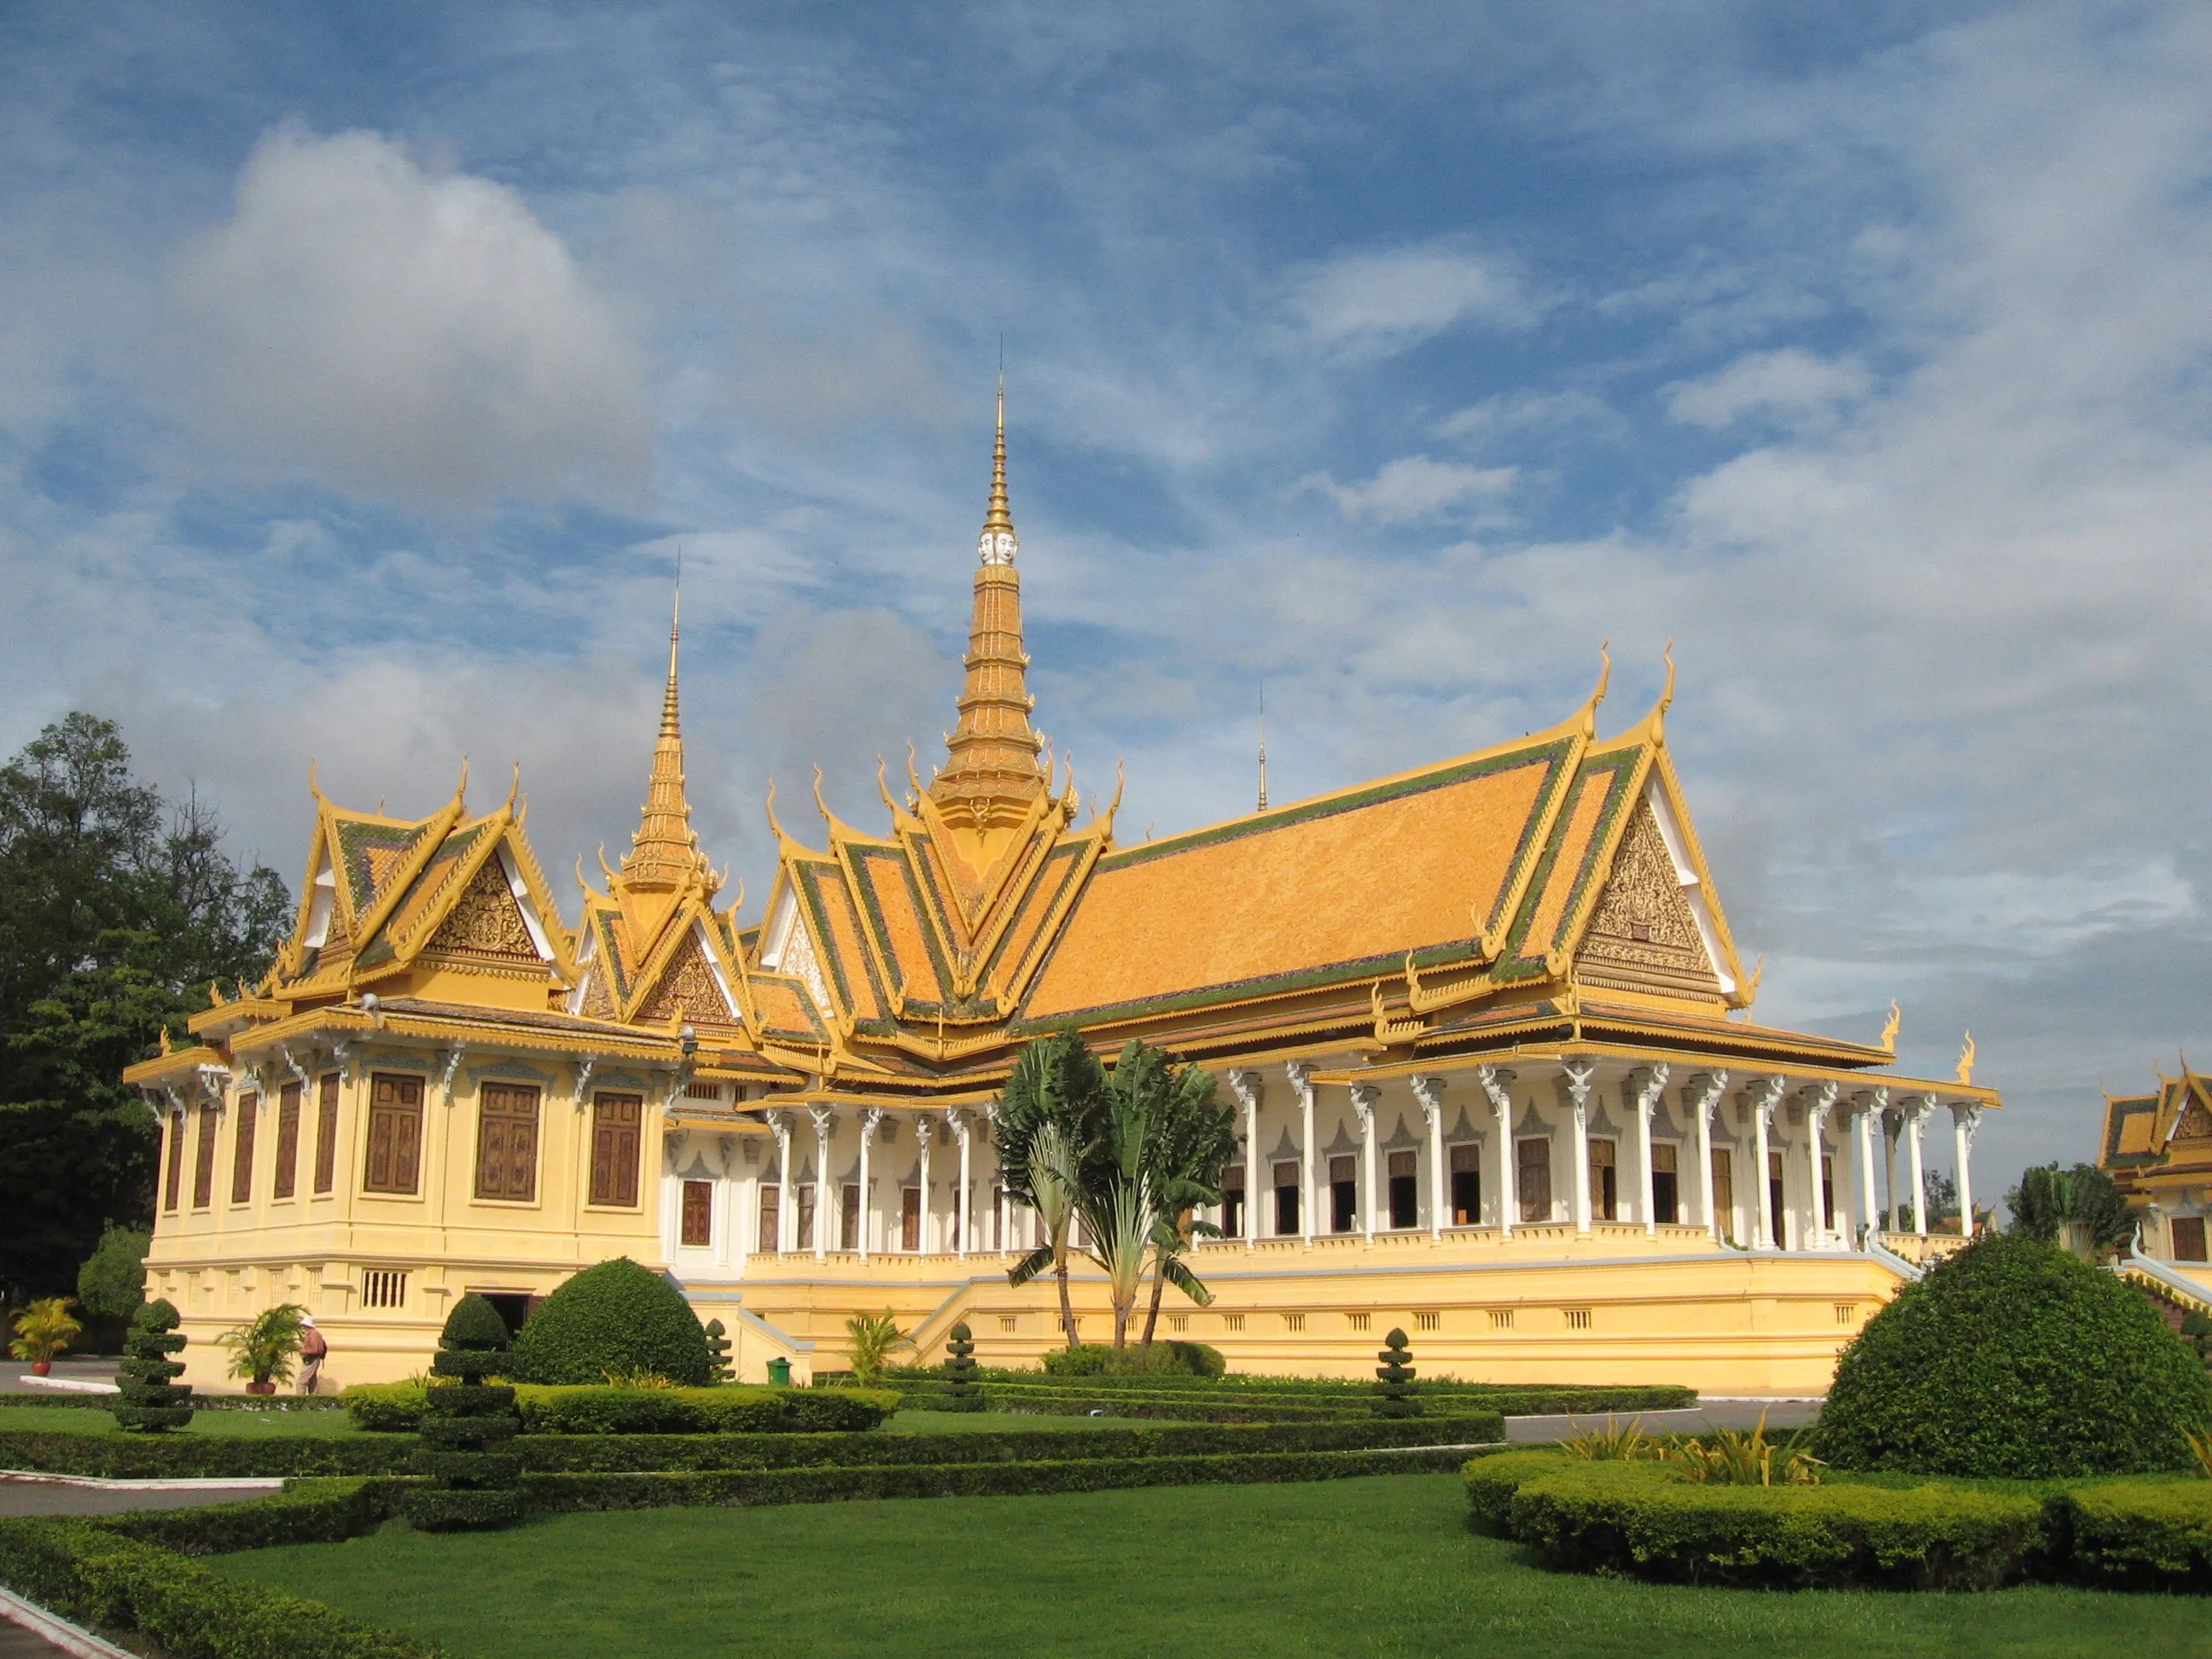 Royal Palace in Cambodia, East Asia | Architecture - Rated 3.6